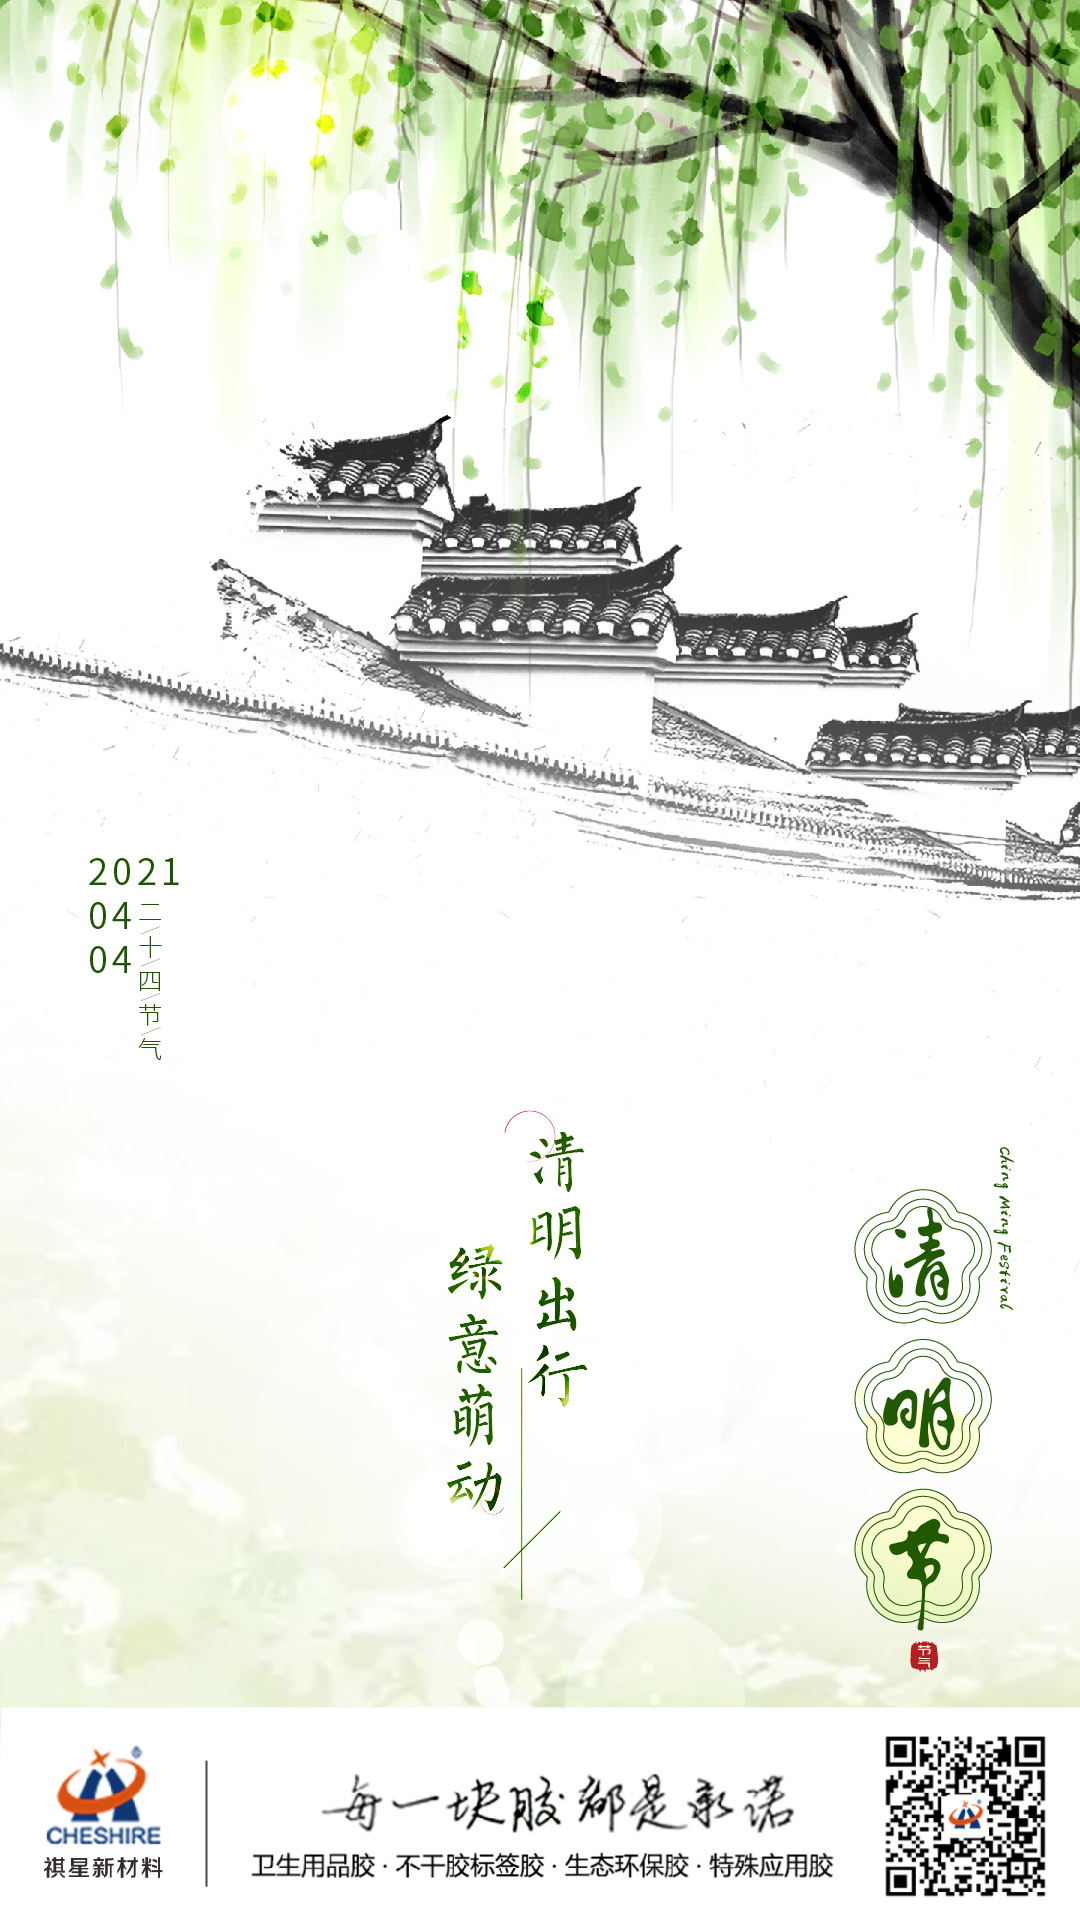 ​This year's Qingming Festival is on Apr. 4th